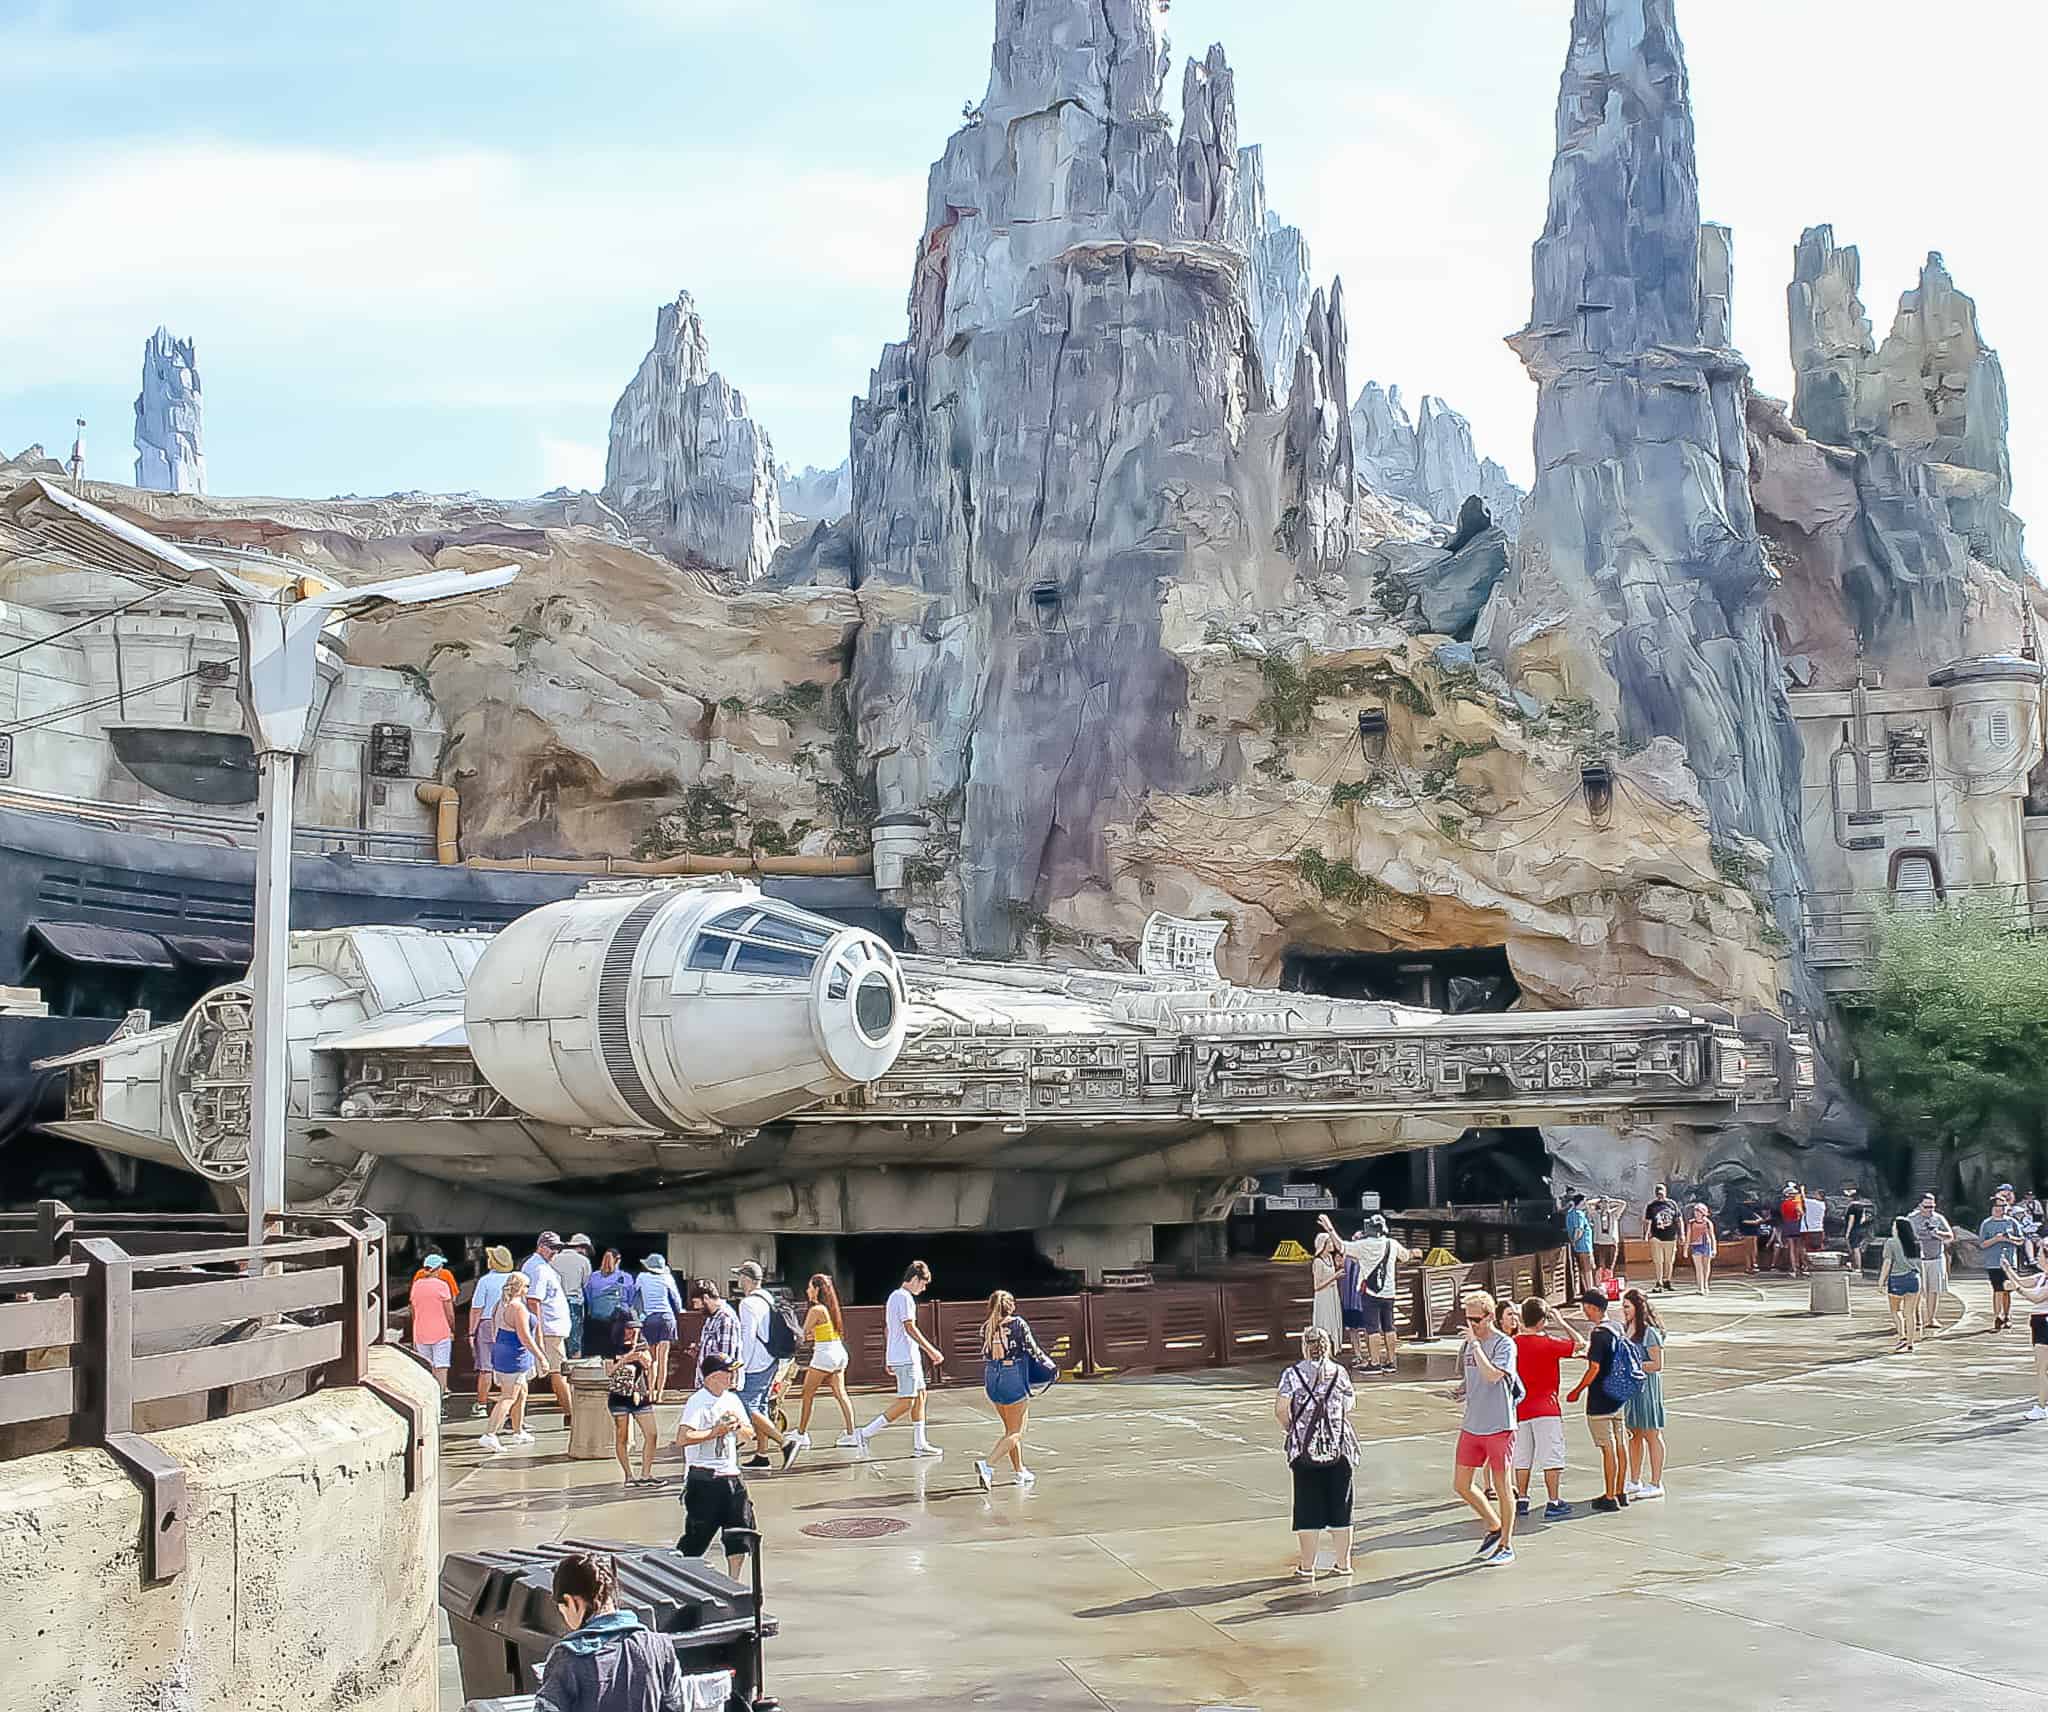 Smugglers Run Ride Review (The Millennium Falcon at Disney World)